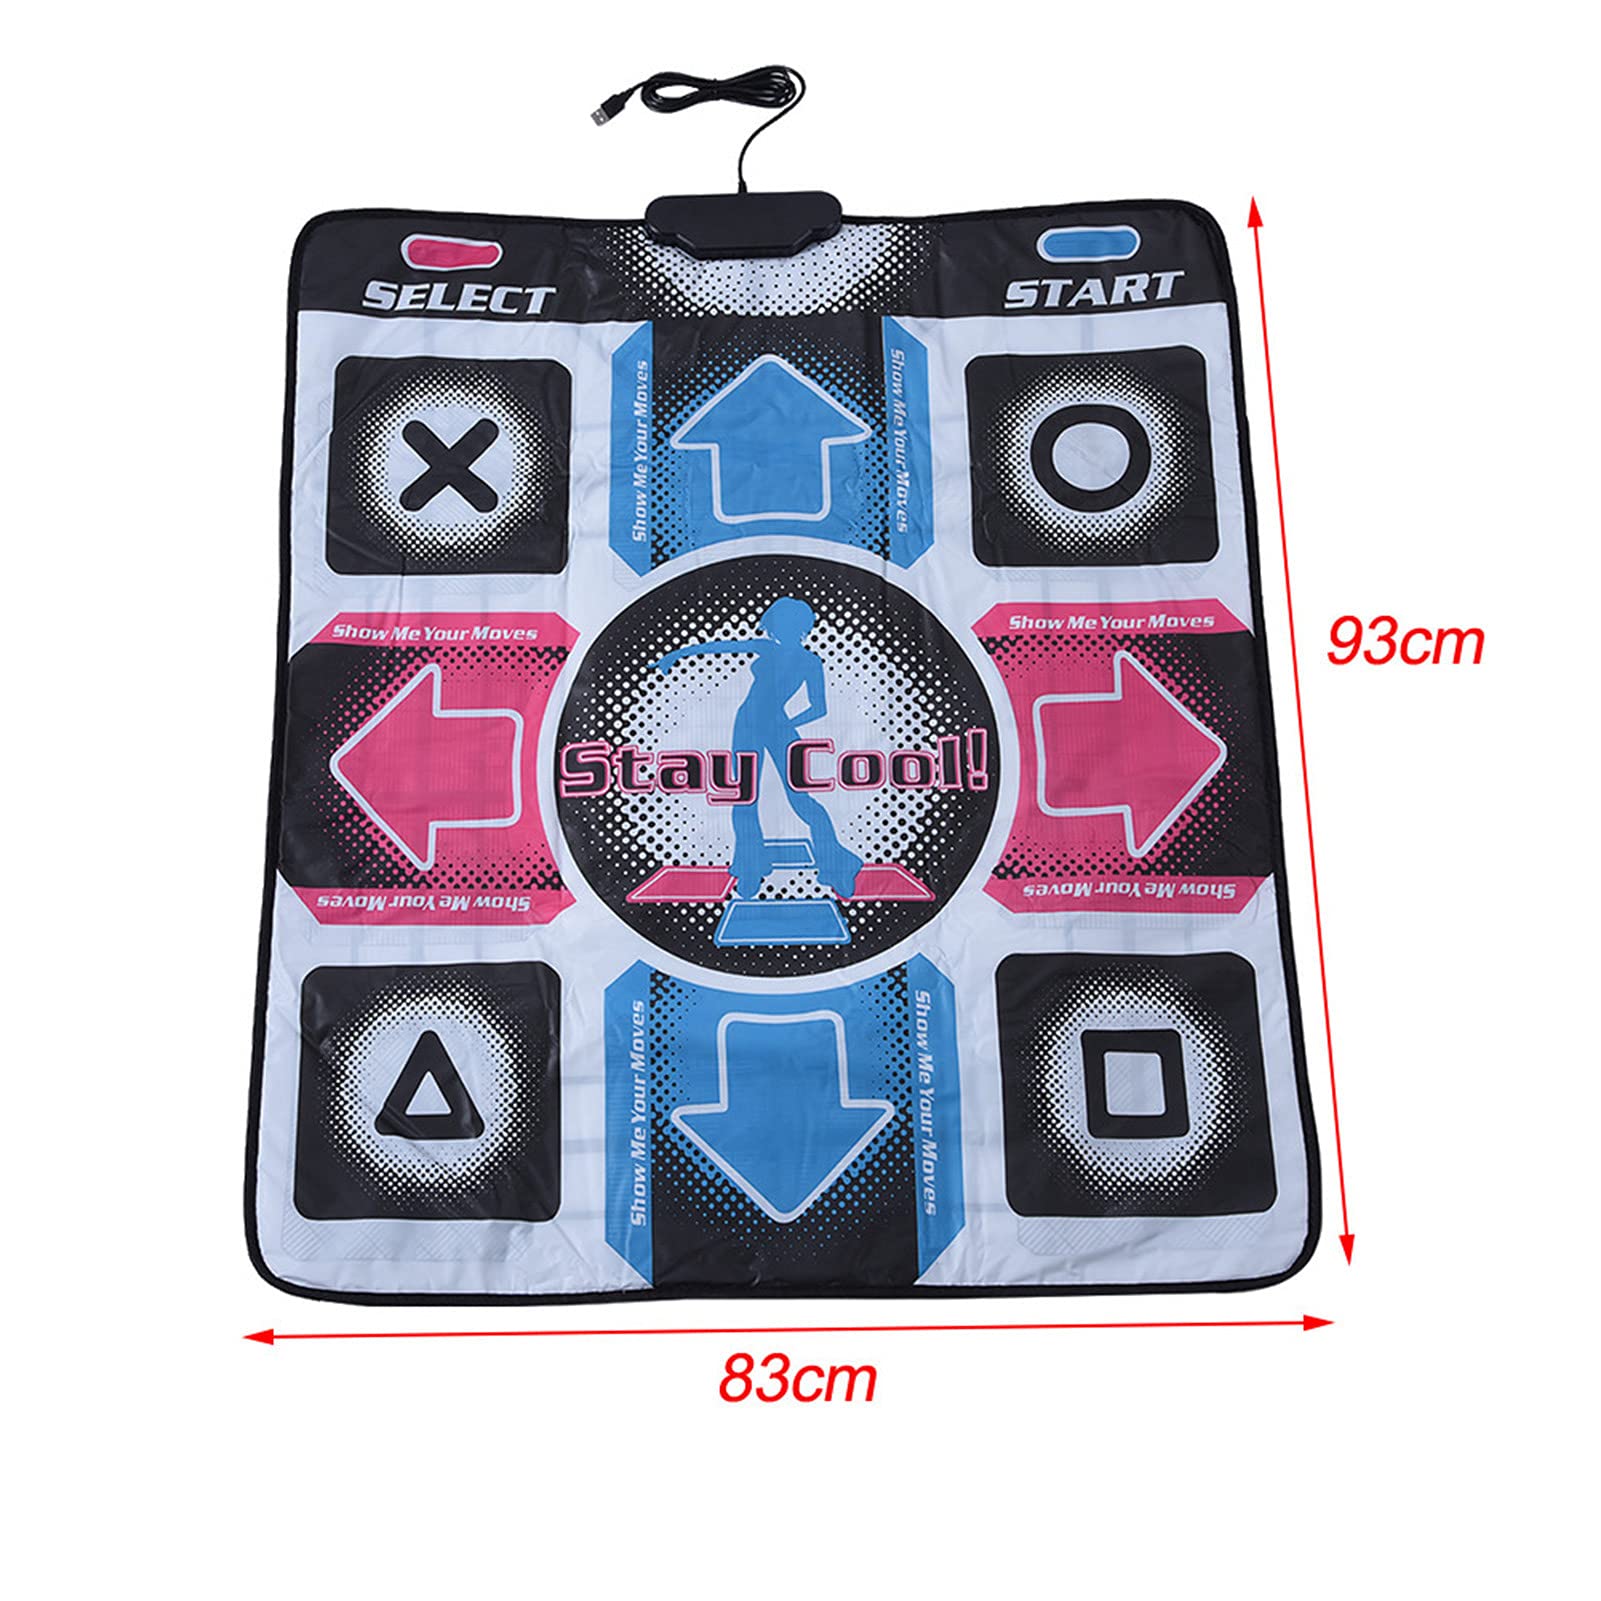 USB Dance Pad, Non-Slip Dancing Step Floor Mat Electronic Musical Carpet Wear Resistant Dancer Blanket Yoga Play Home Dance Machine Gift for Family Girls Boys Adults PC Laptop Computer Video Game